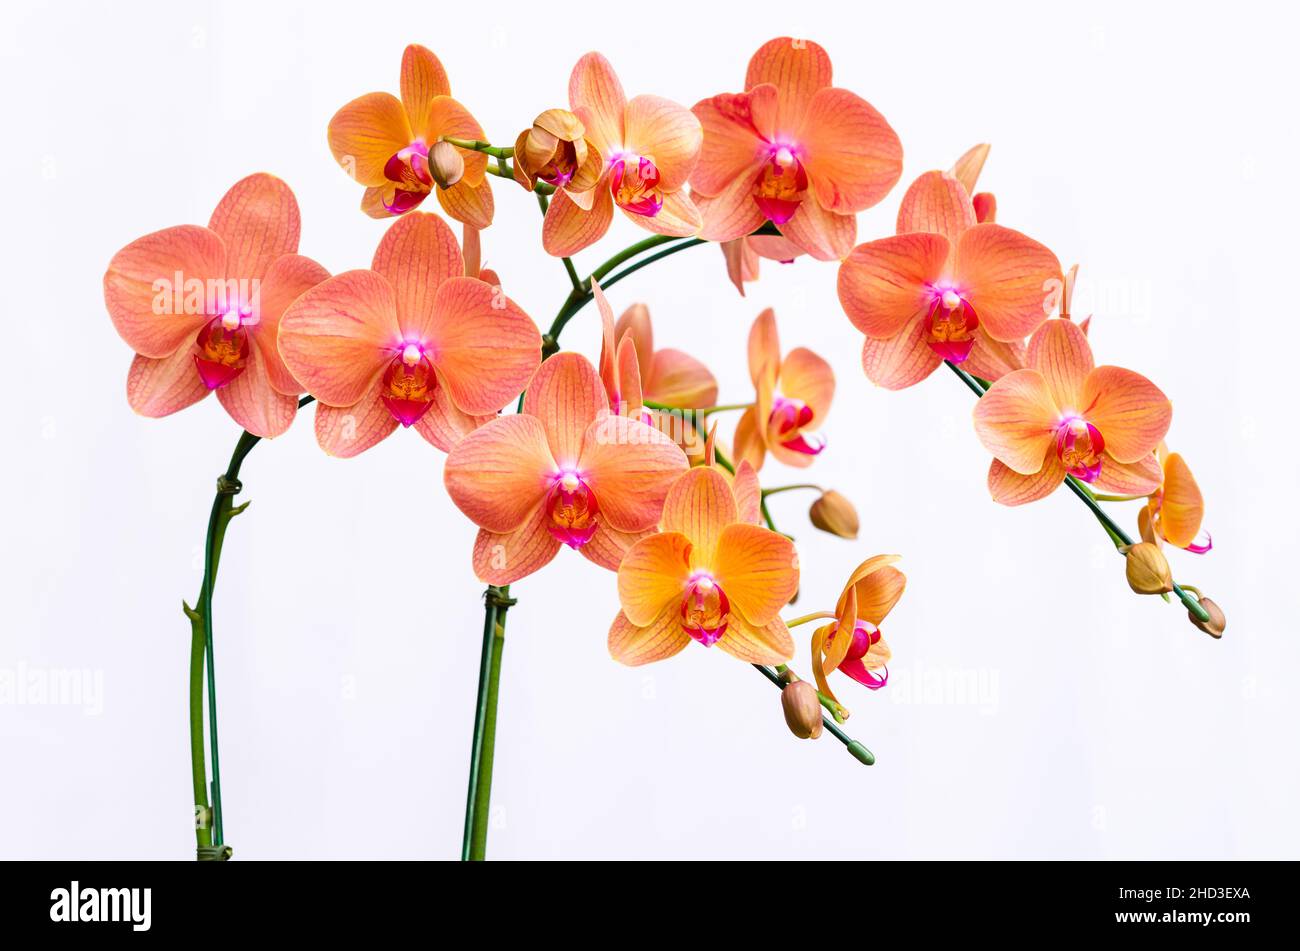 Two branches of blooming orange color Phalaenopsis orchids (Moon orchid, Moth ochid) on white background. Stock Photo